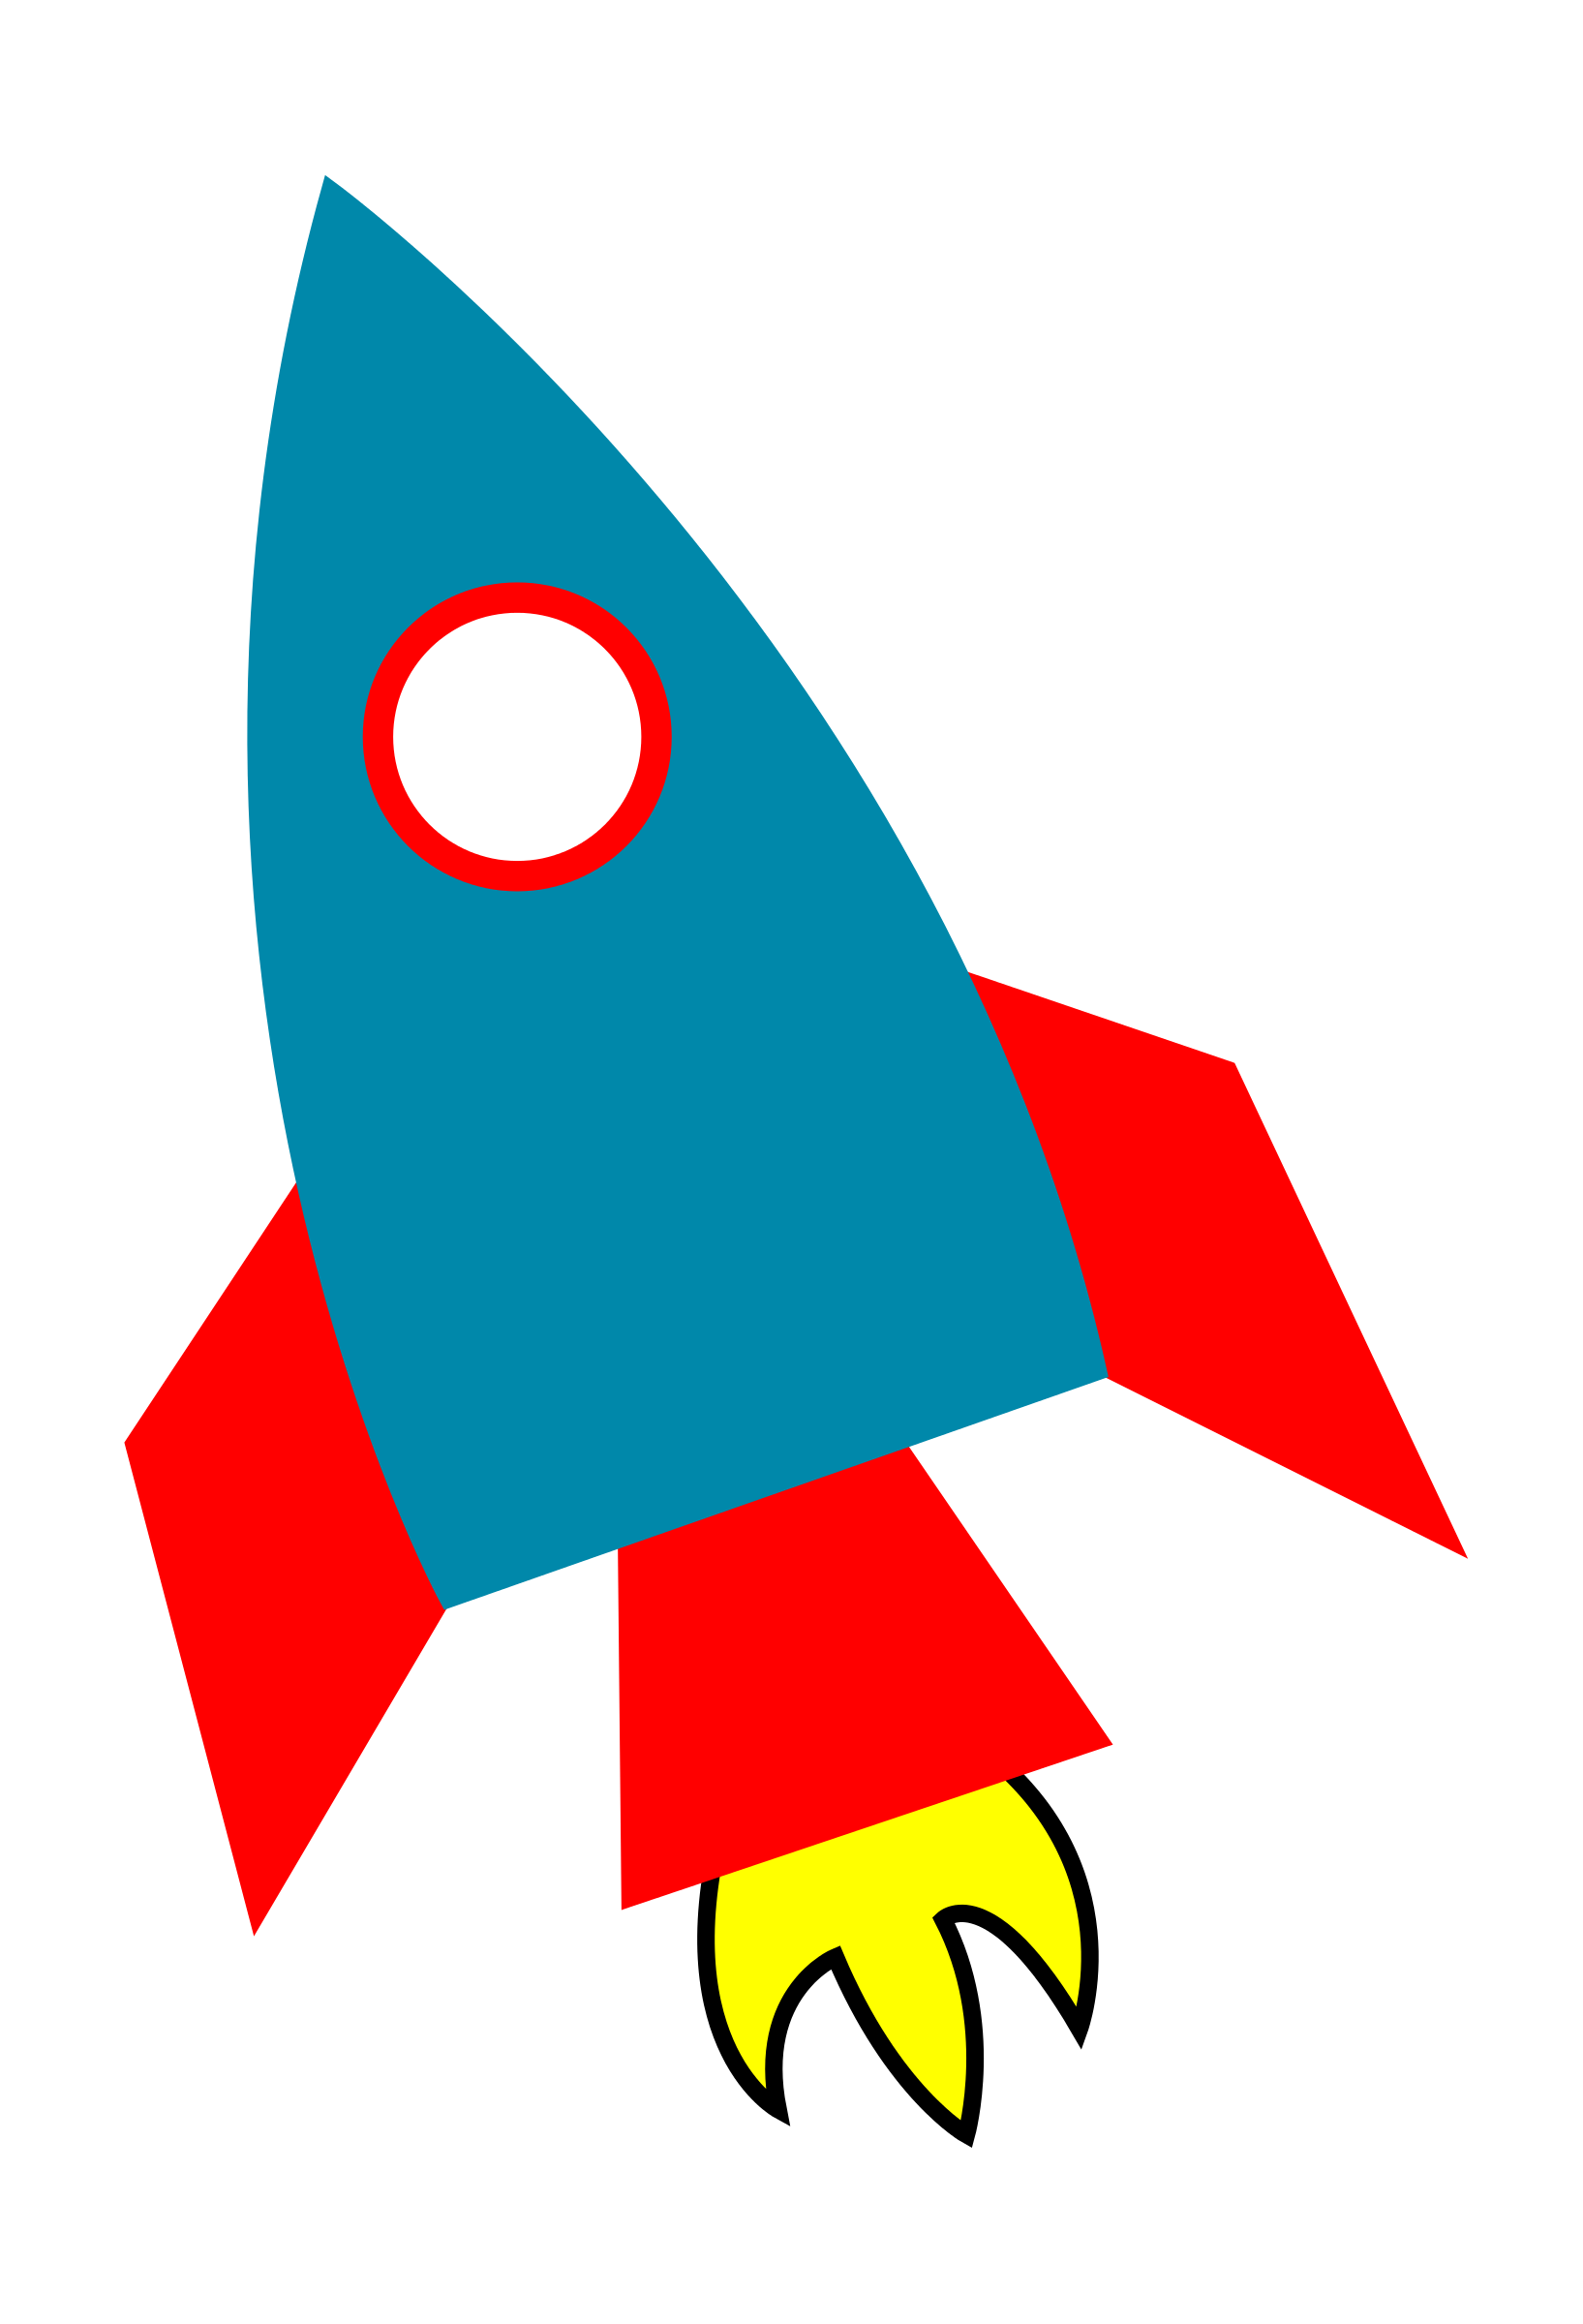 Space rocket clipart clipart kid 4